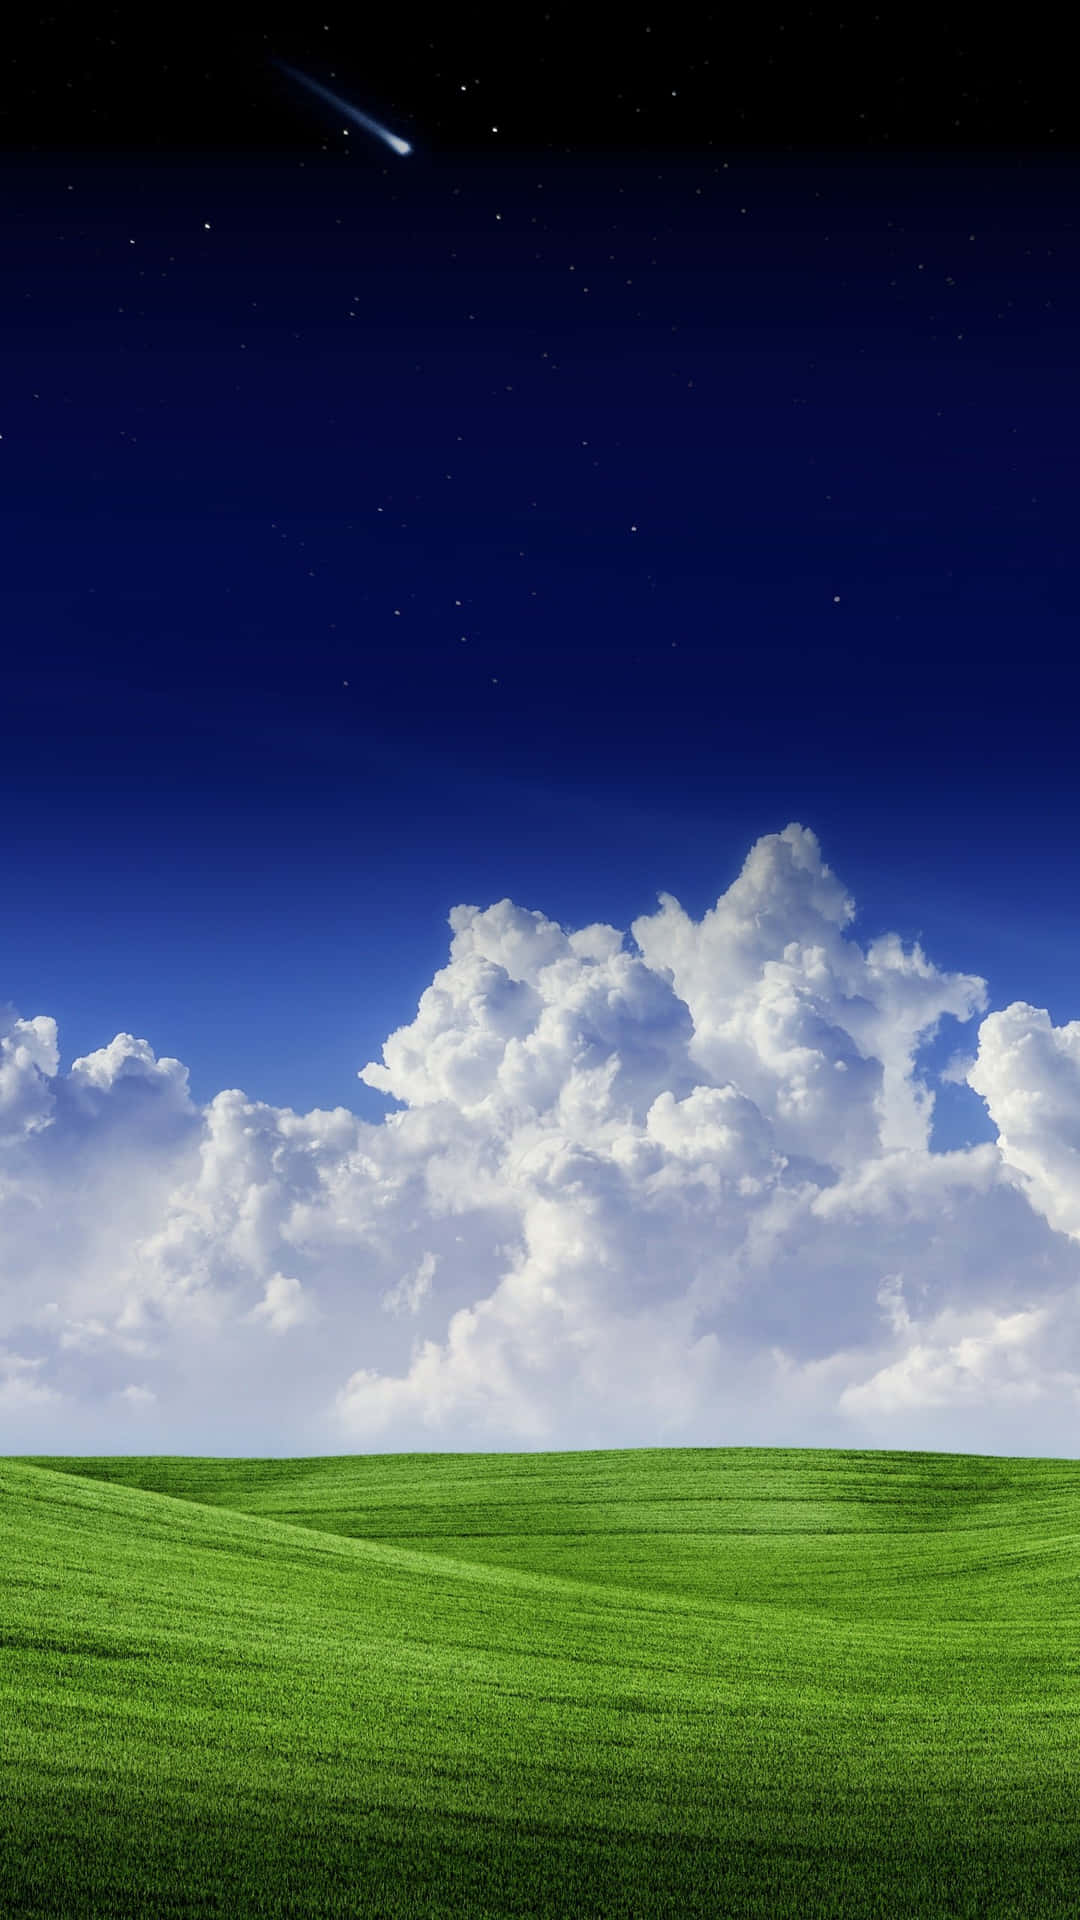 Shooting Star Grass And Sky Background